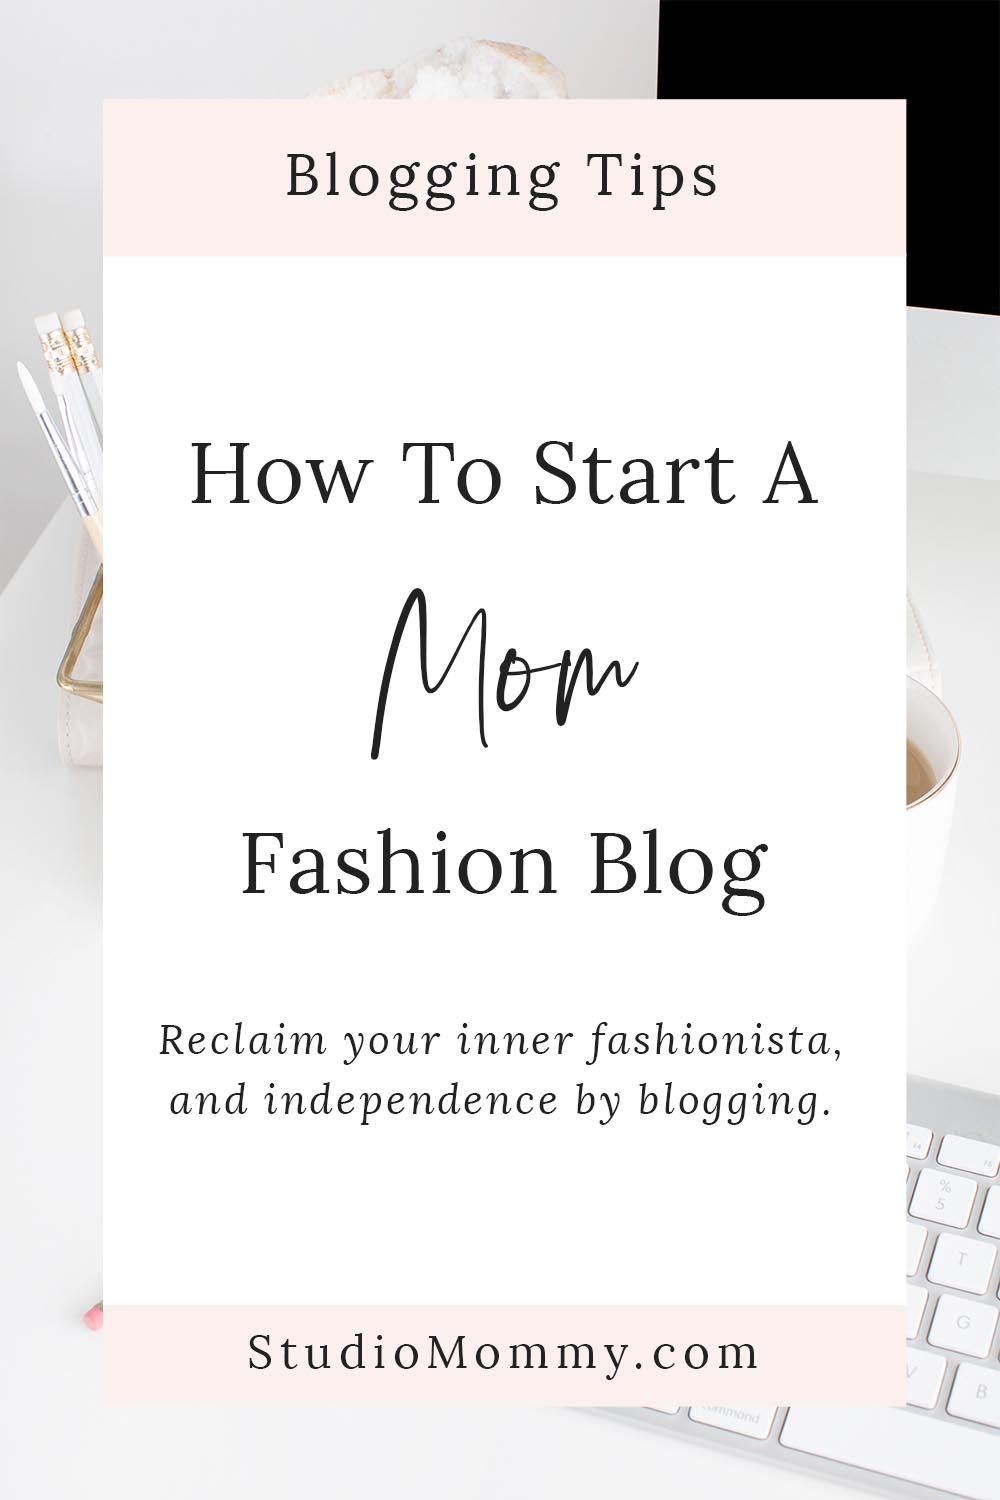 Reclaim your inner fashionista and a sense of independence and purpose by blogging. A blog is an accessible platform for expression — from sharing stories about motherhood and fashion inspirations to posting cute outfits and hot trends. A blog about fashion from the perspective of a full-time mom will be your digital space where you can be creative, feel purposeful and connect with others who share your passions and insights.  #fashion #fashionblog #wordpressblog #momblog #fashionmom @studiomommy